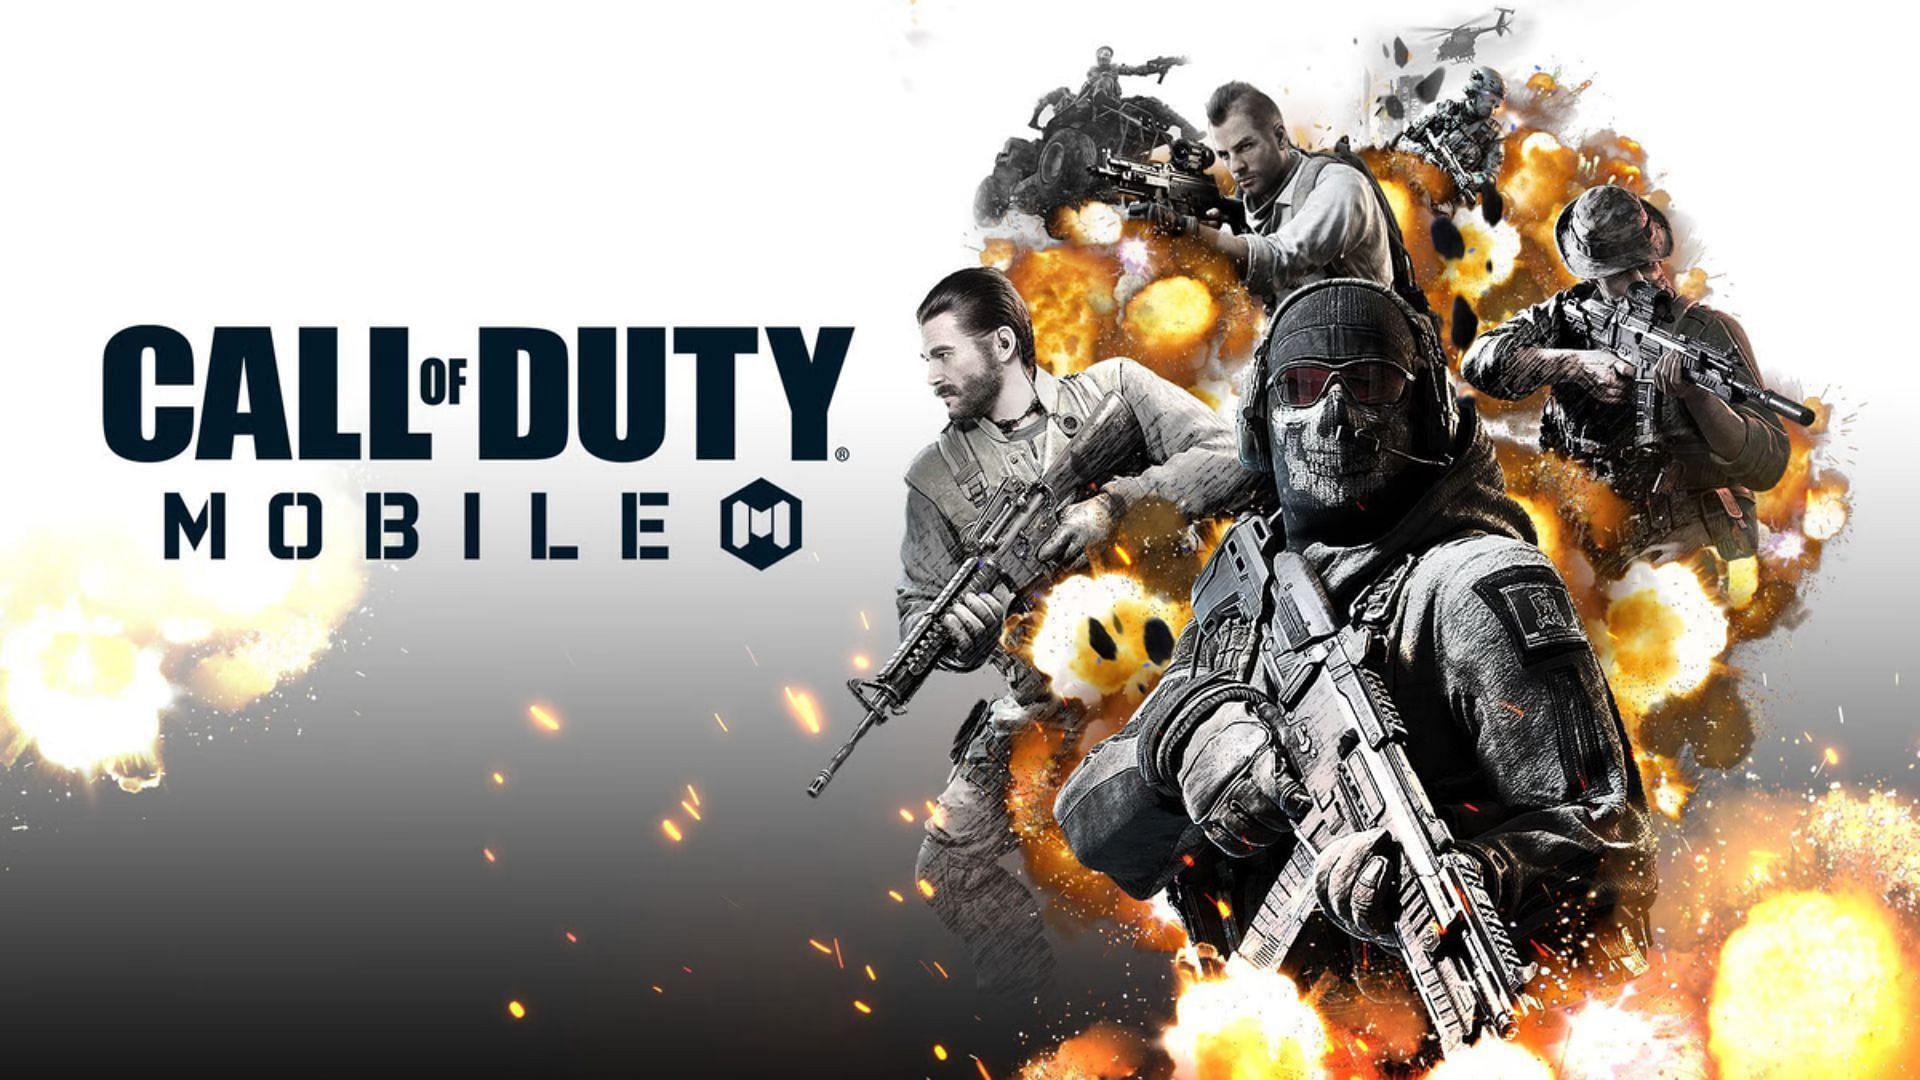 Call of Duty: Mobile (Mobile) (gamerip) (2020) MP3 - Download Call